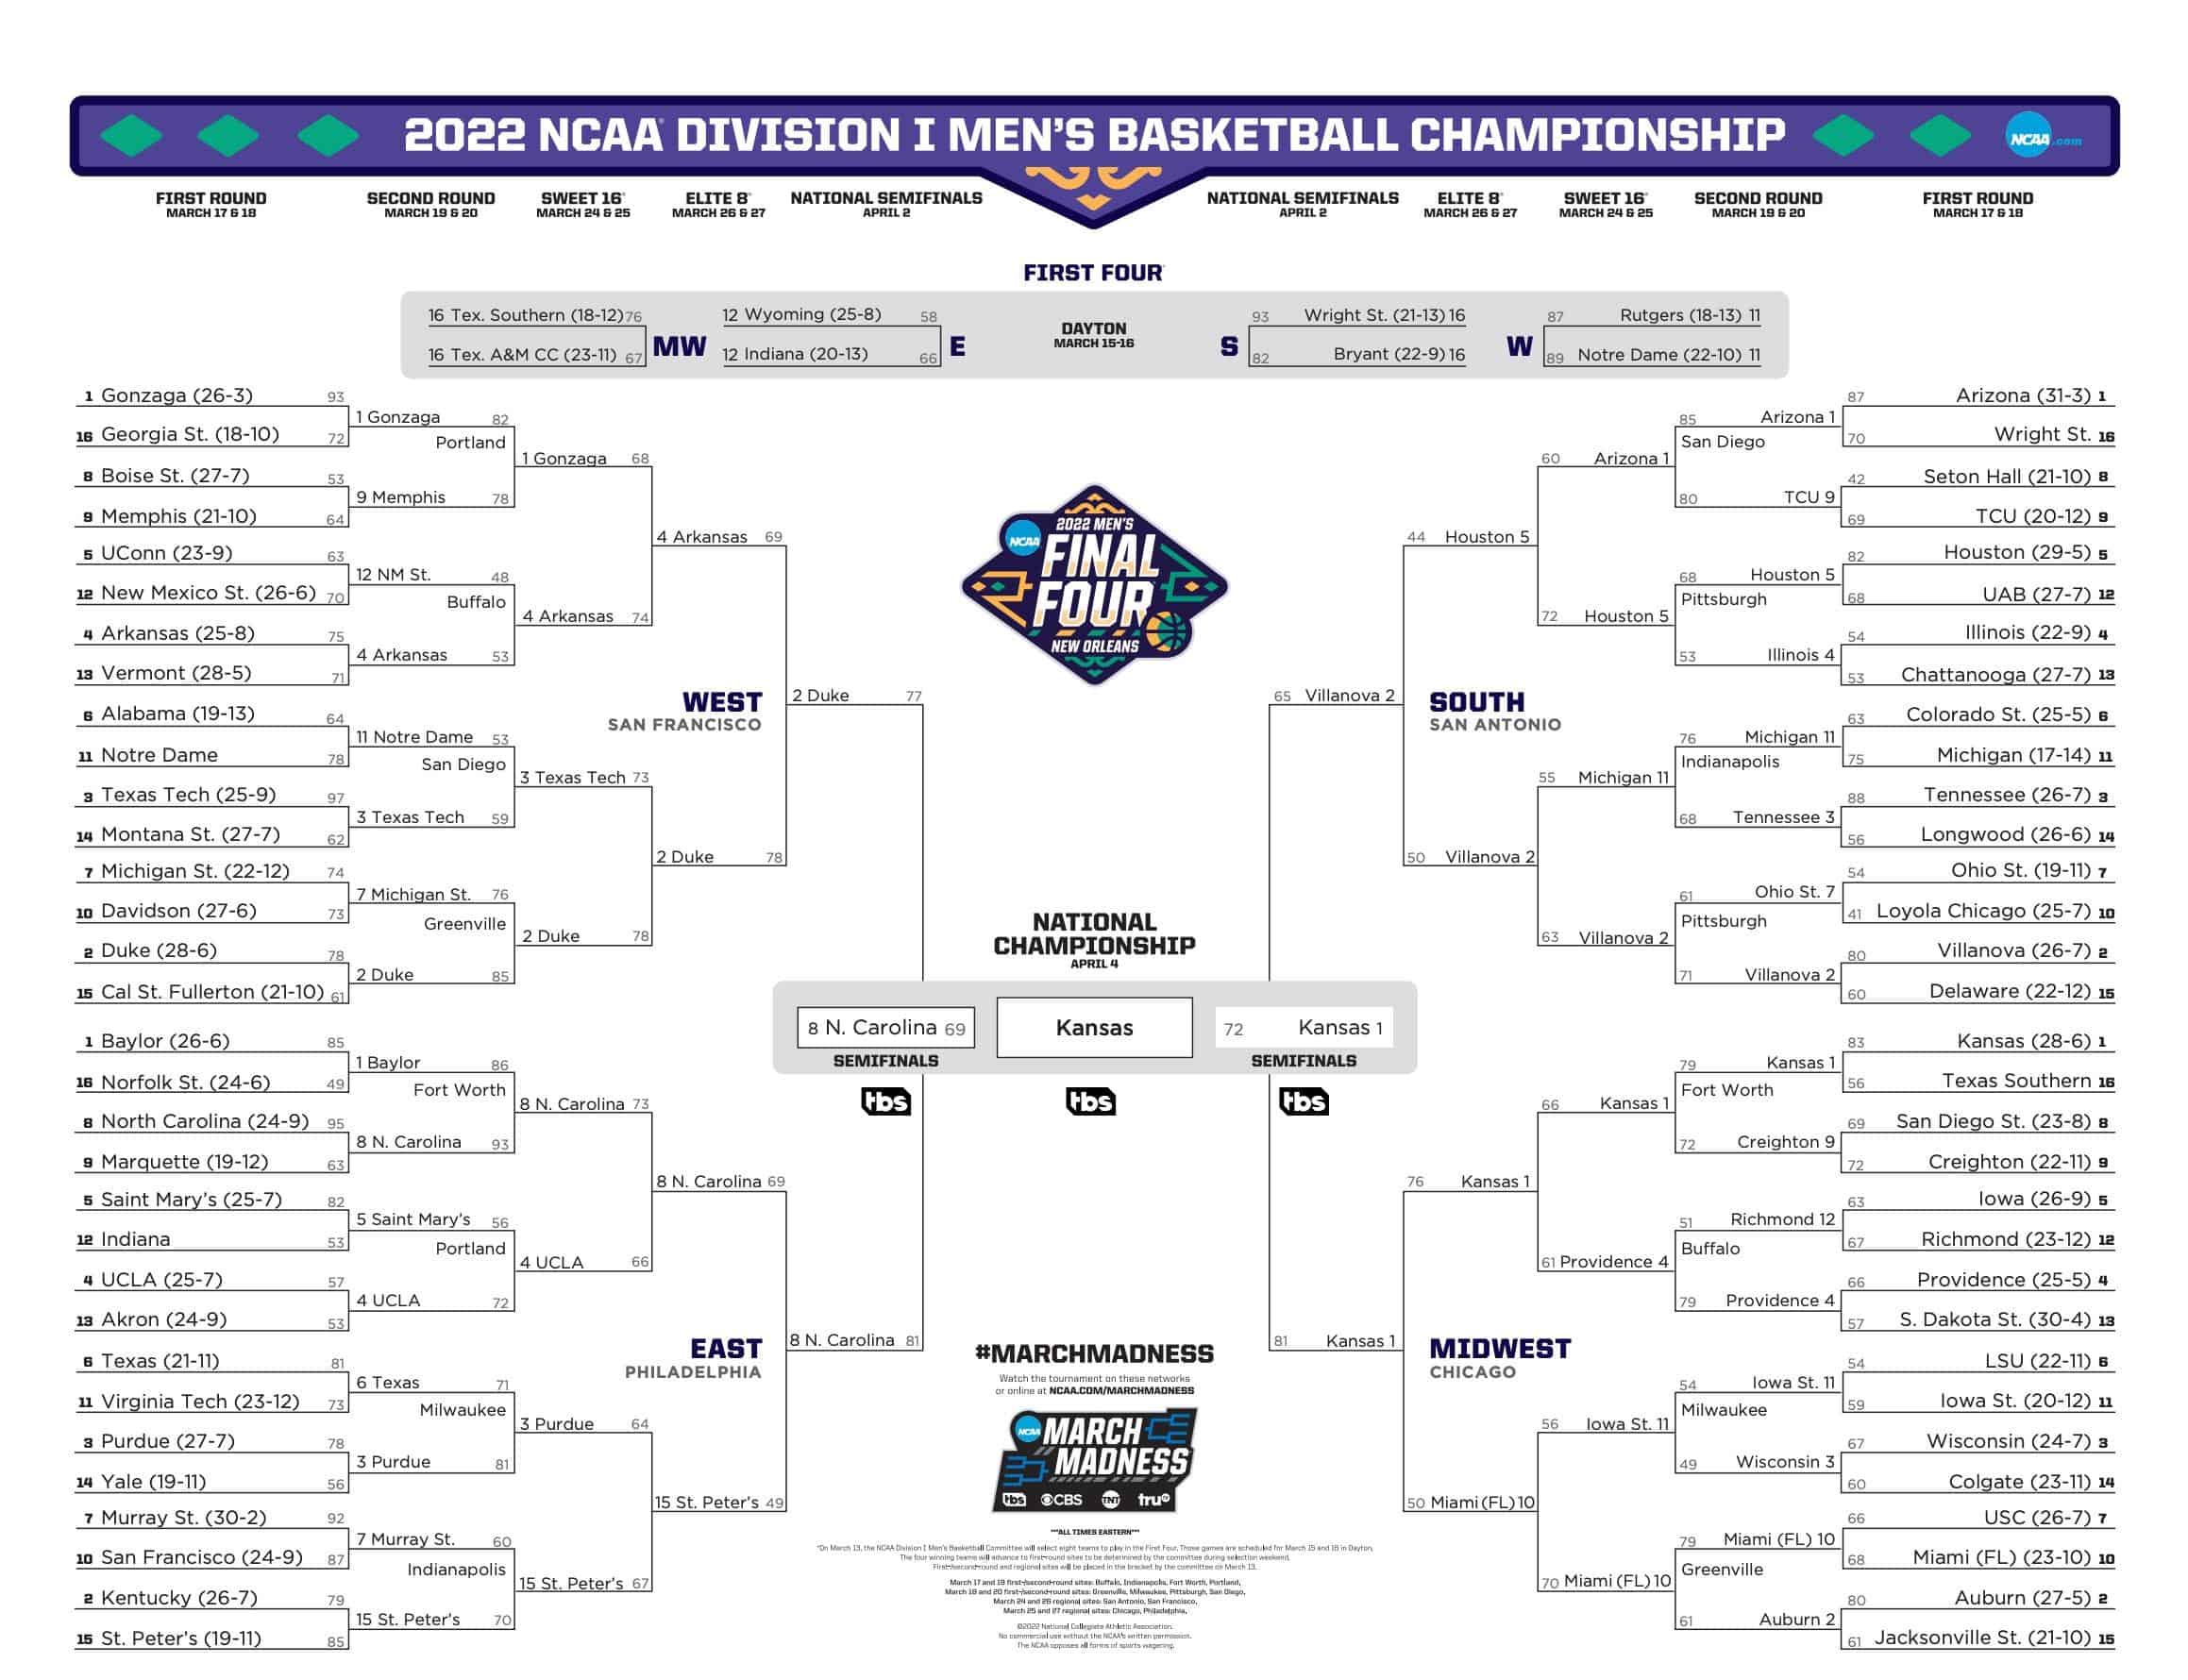 NCAA March Madness 2022 bracket in this image from NCAA 